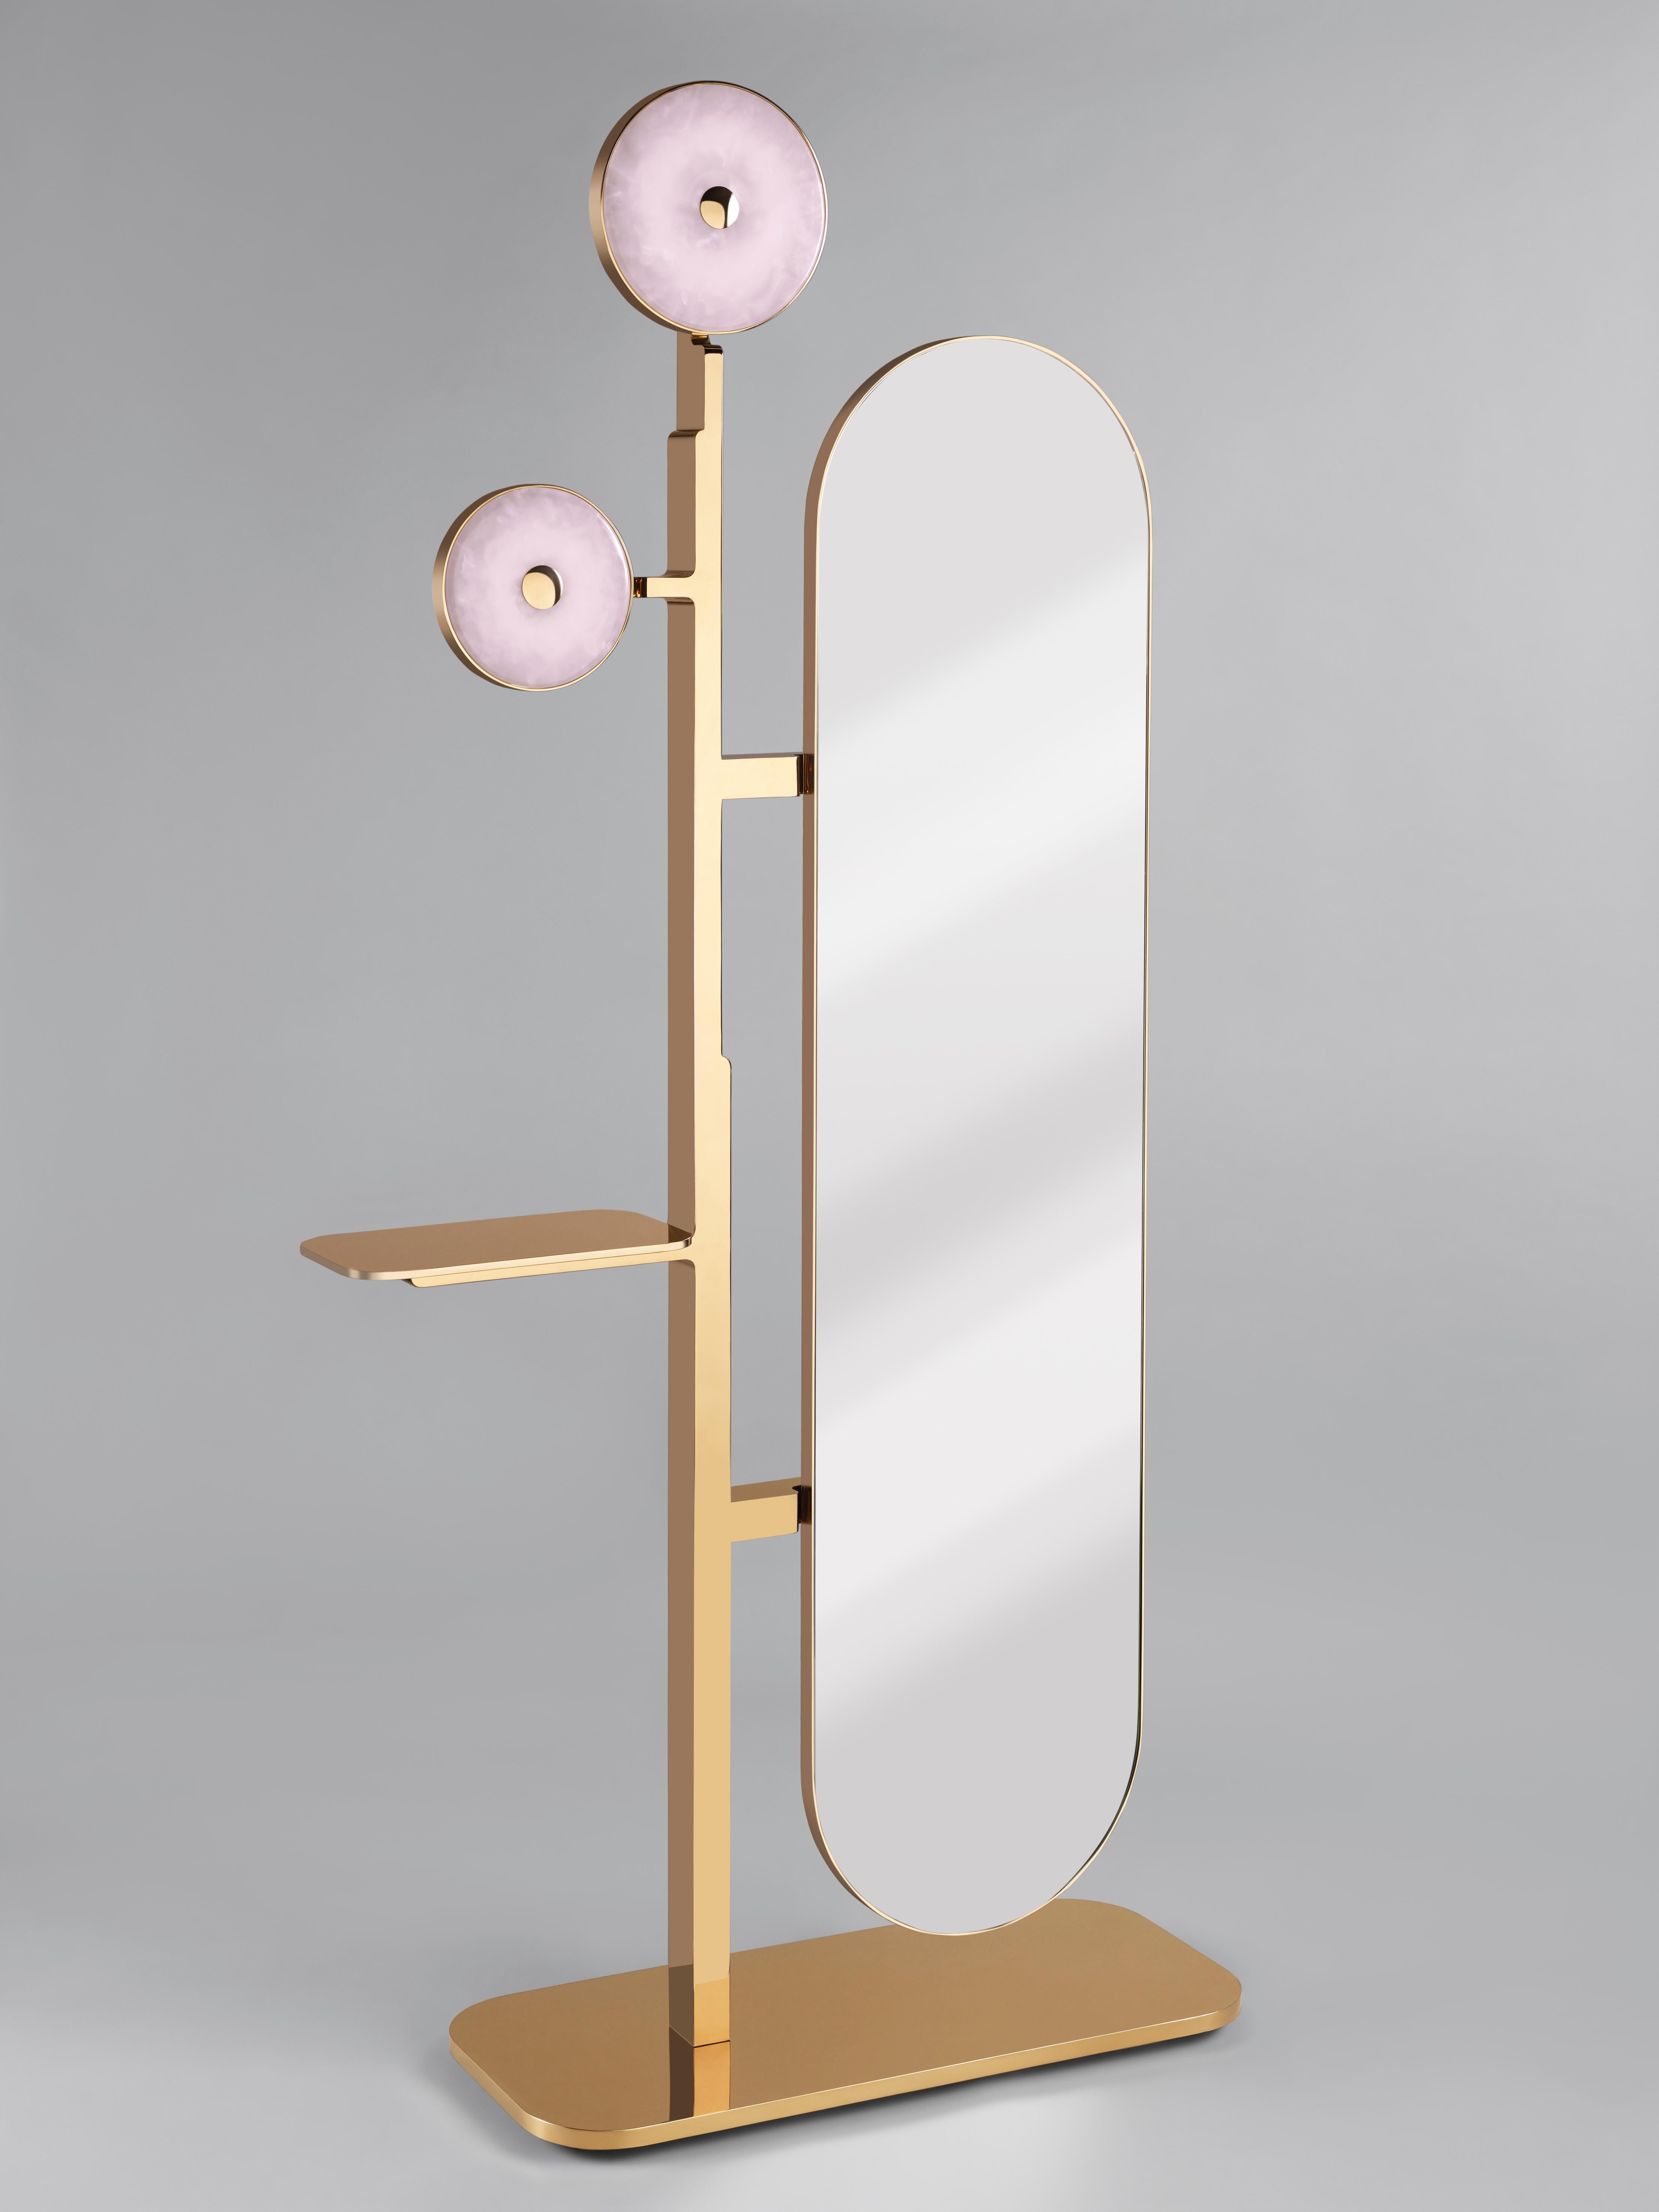 This 'JinShi Pink Jade' glamorous mirror by acclaimed design duo Studio MVW is a true jewel for the home. The mirror encompasses two retro-lit heads in natural pink jade, an exceptional gemstone with a sumptuous powder transparency, and a structure